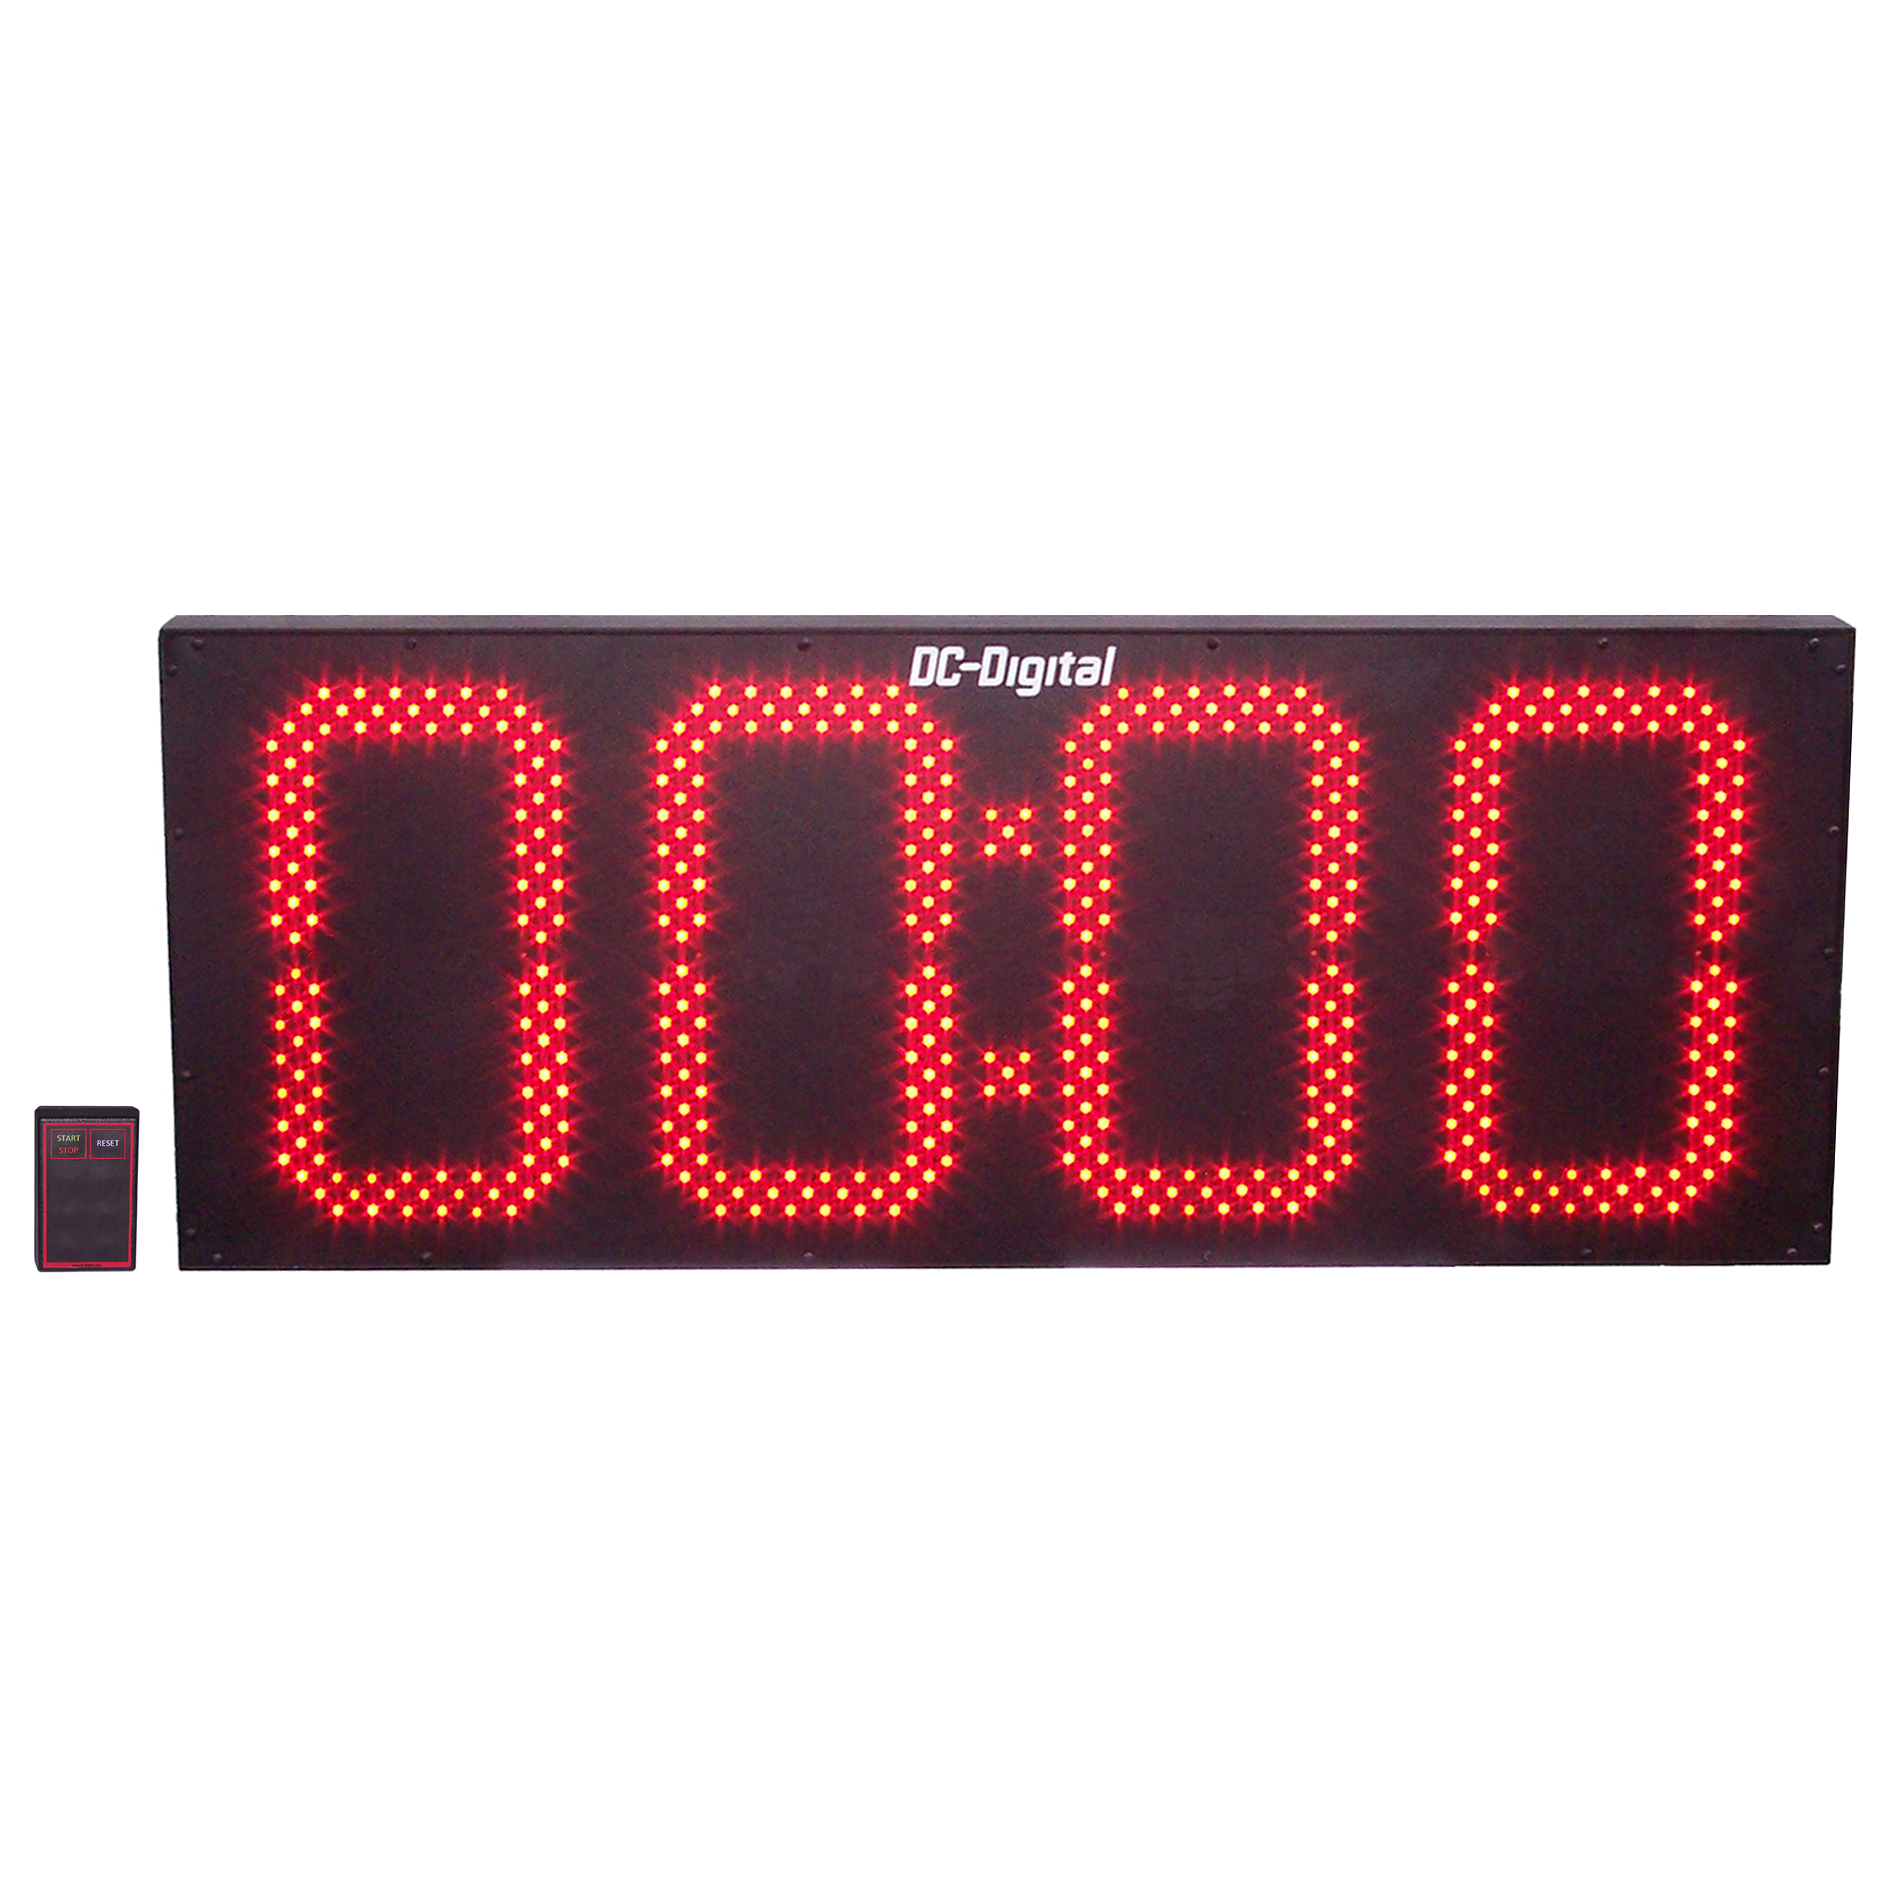 (DC-150T-UP-W) 15.0 Inch LED Digital, RF-Wireless Controlled, Count Up Timer, Shift Digit Technology (OUTDOOR)